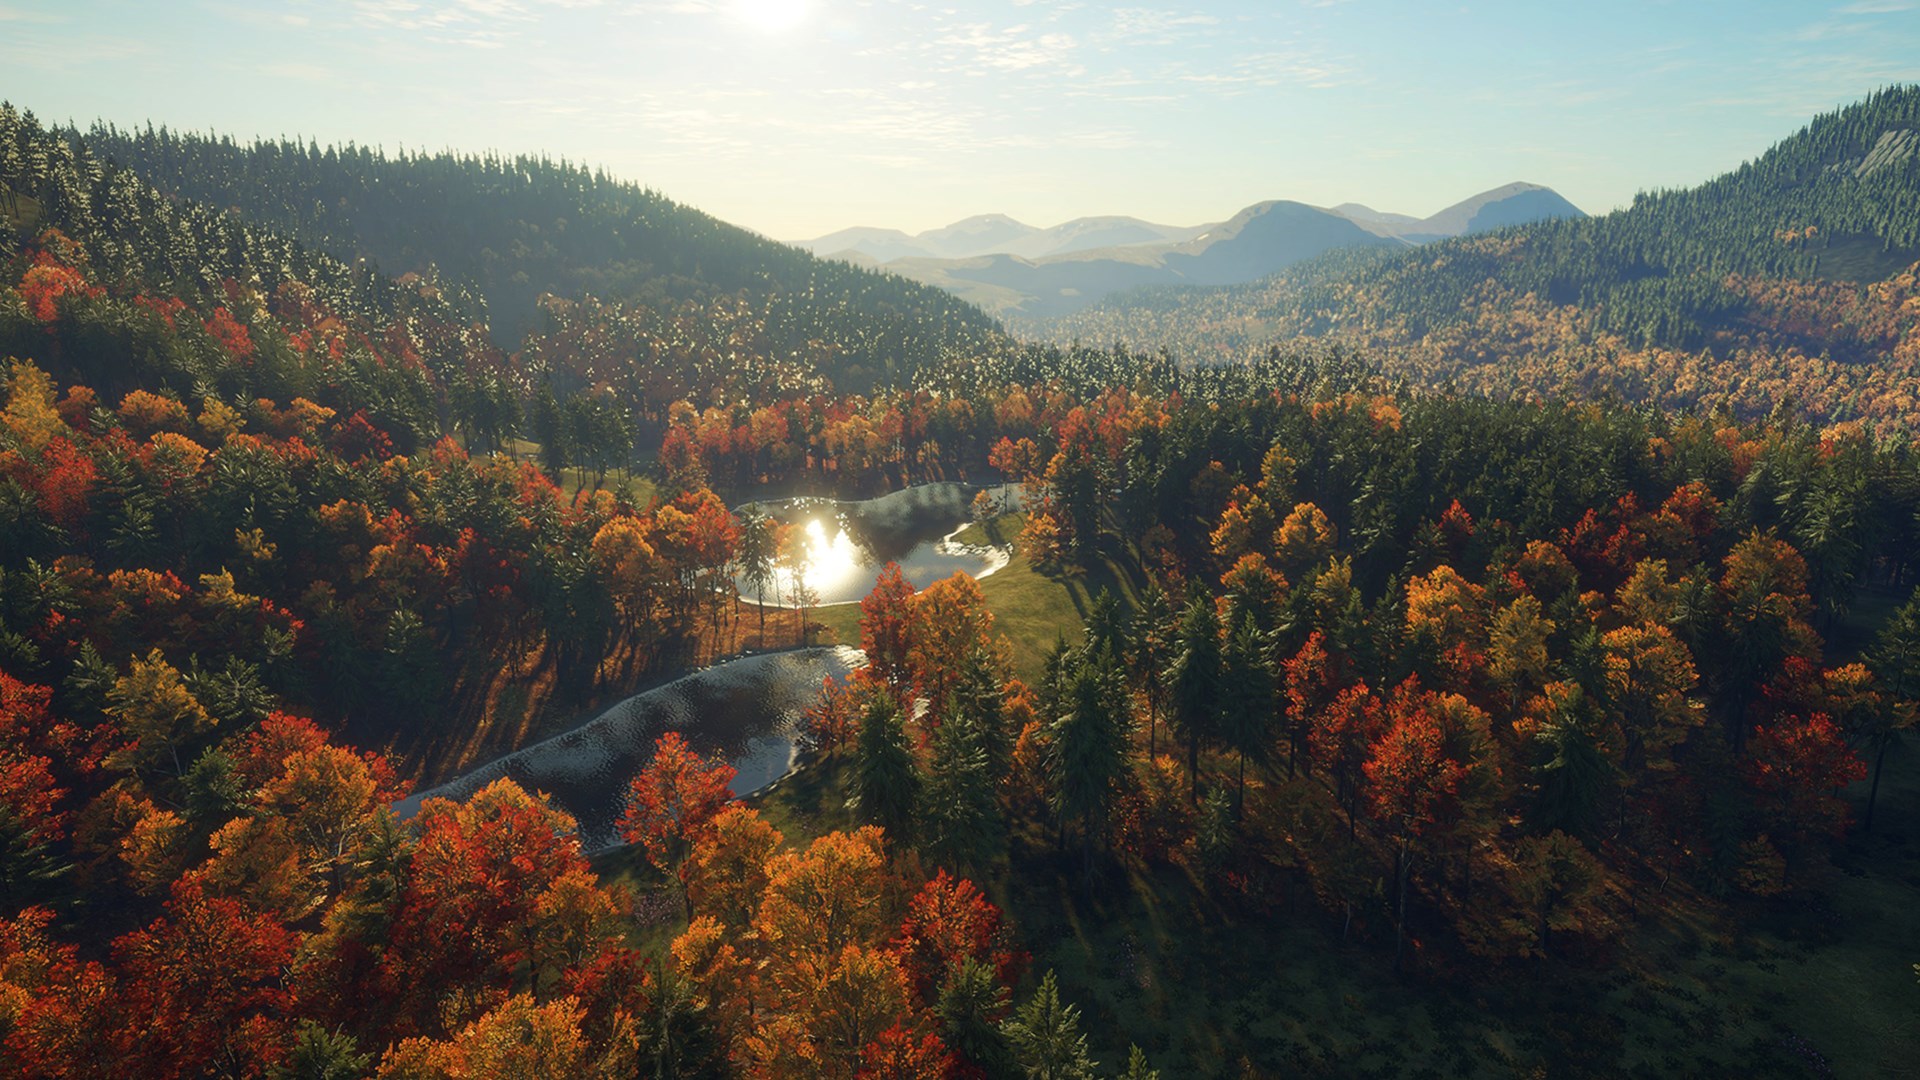 theHunter Call of the Wild™ - New England Mountains